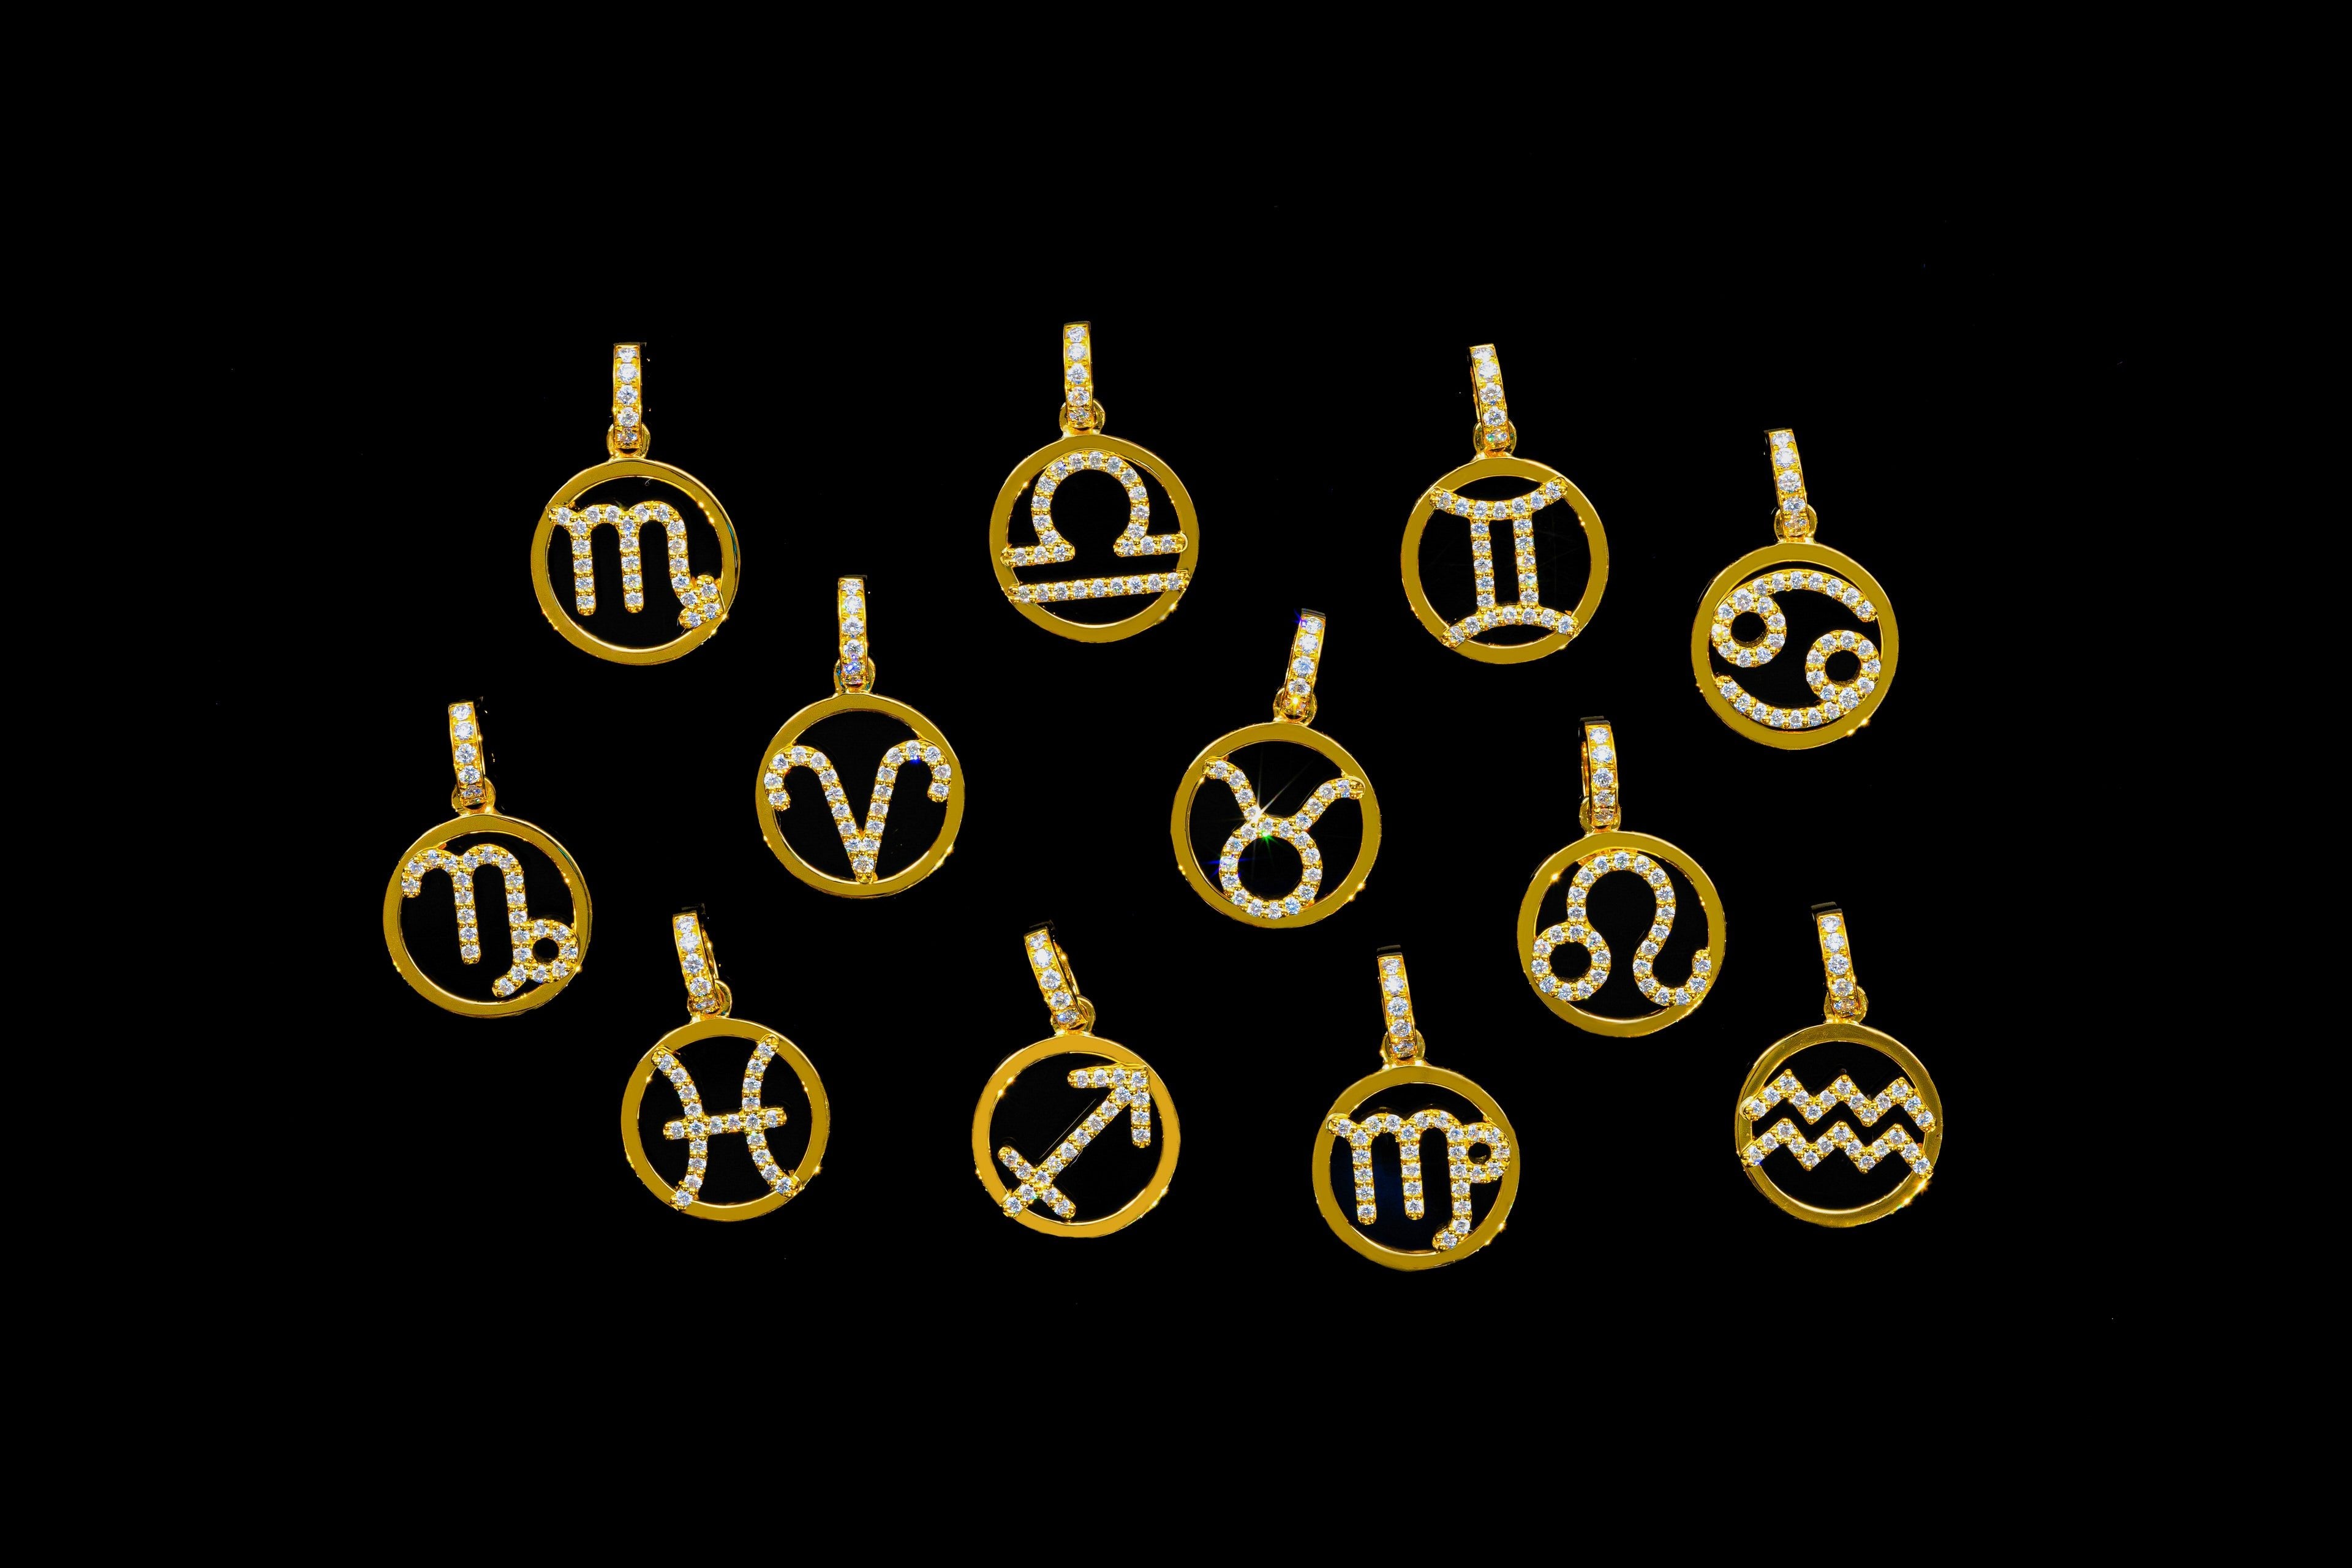 Astrology Jewelry - IF & Co.